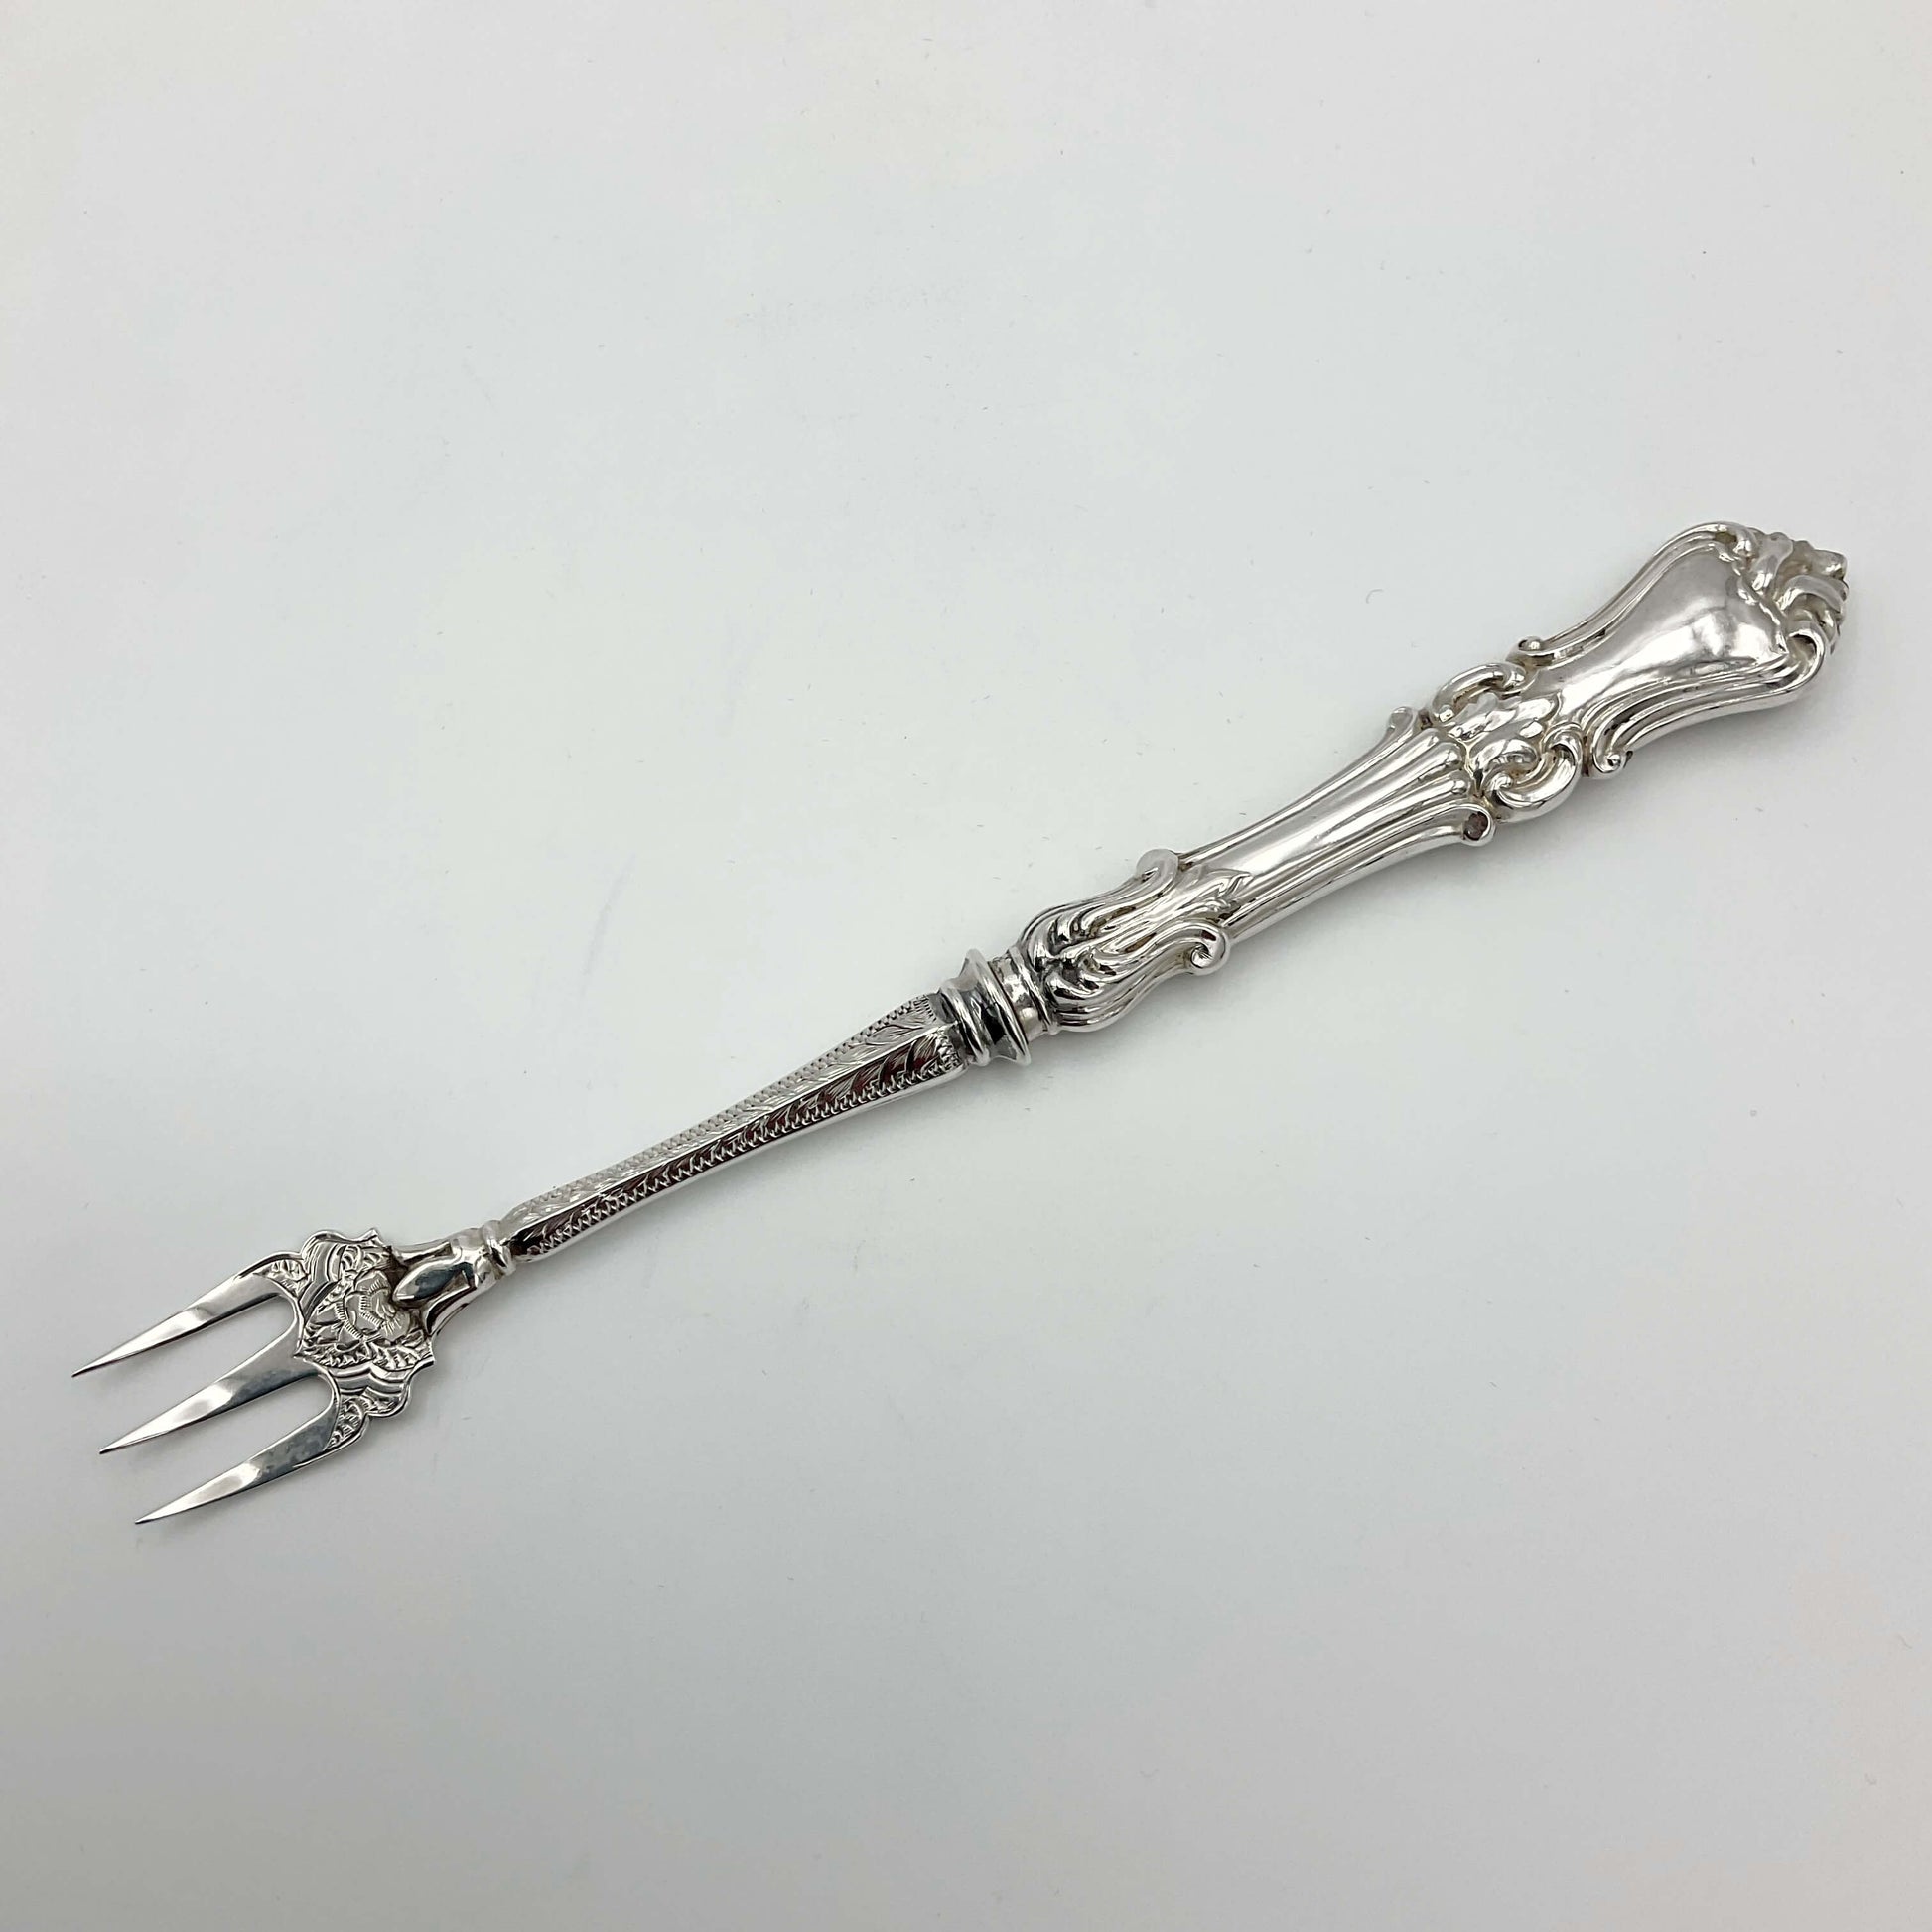 Beautiful ornate antique pickle fork on white background